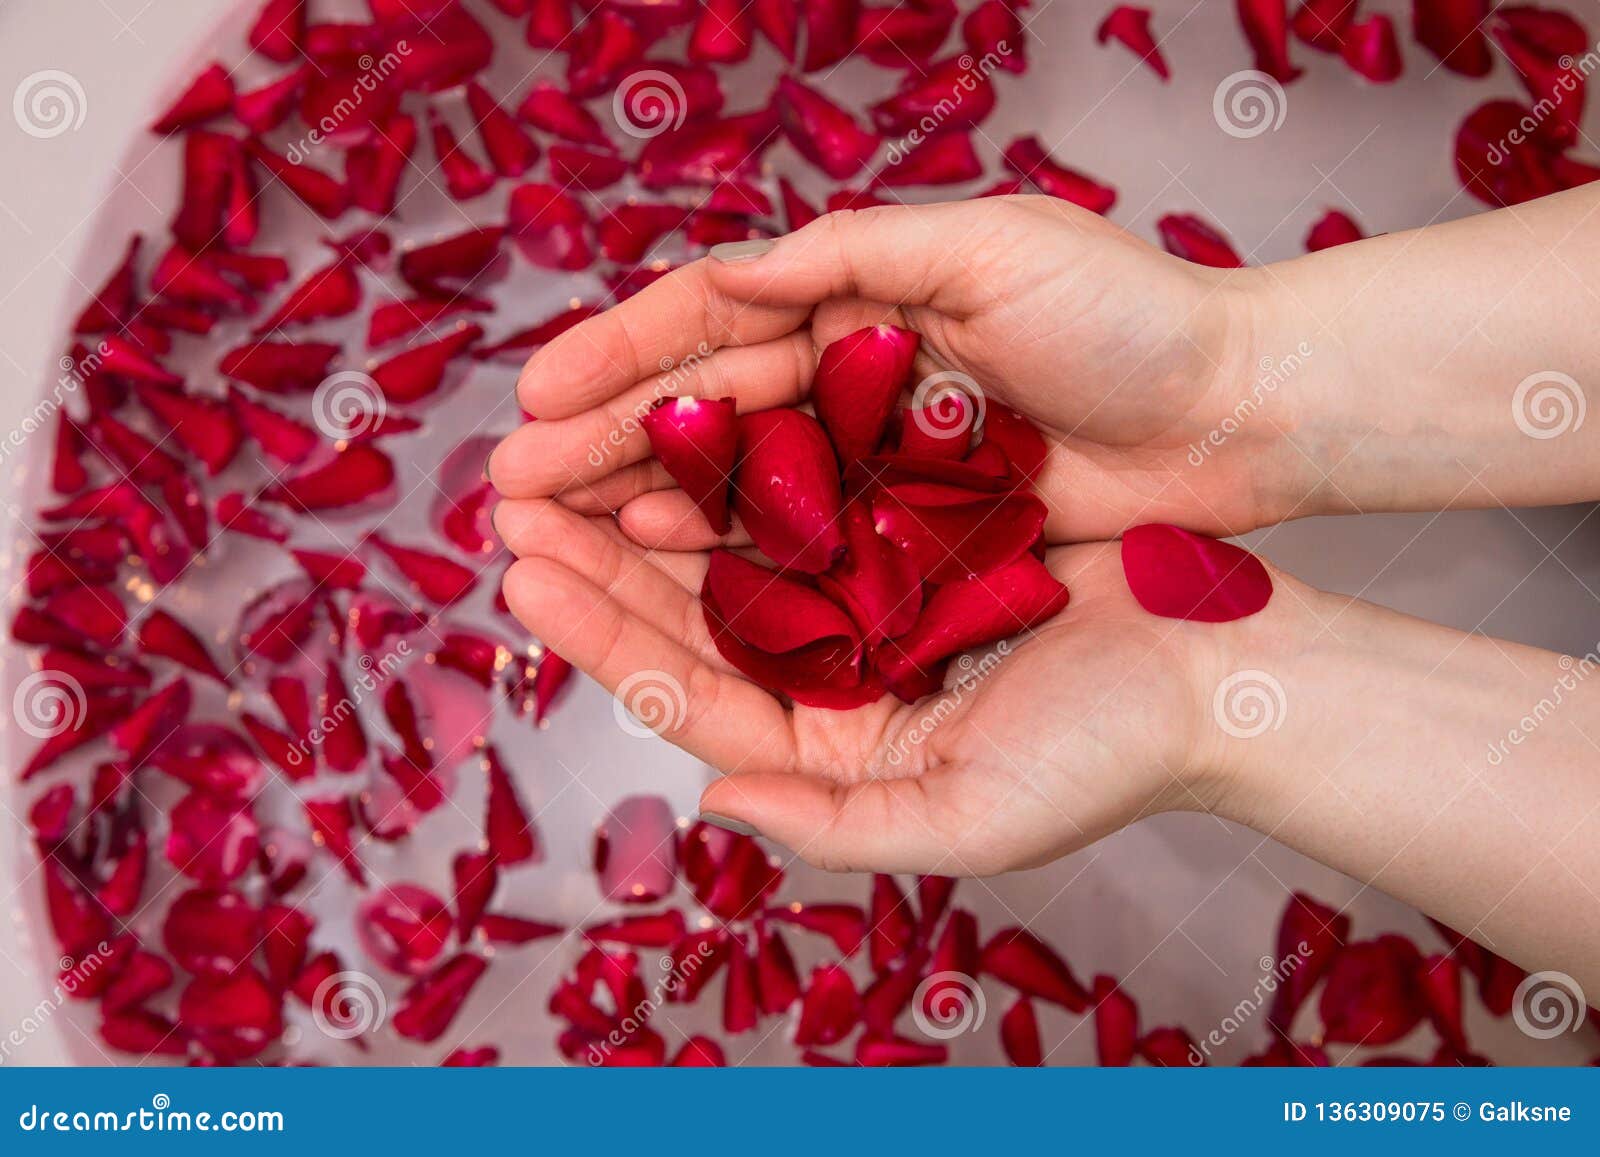 valentines day surprise, close up woman holding red rose petals in hands,selfcare homespa